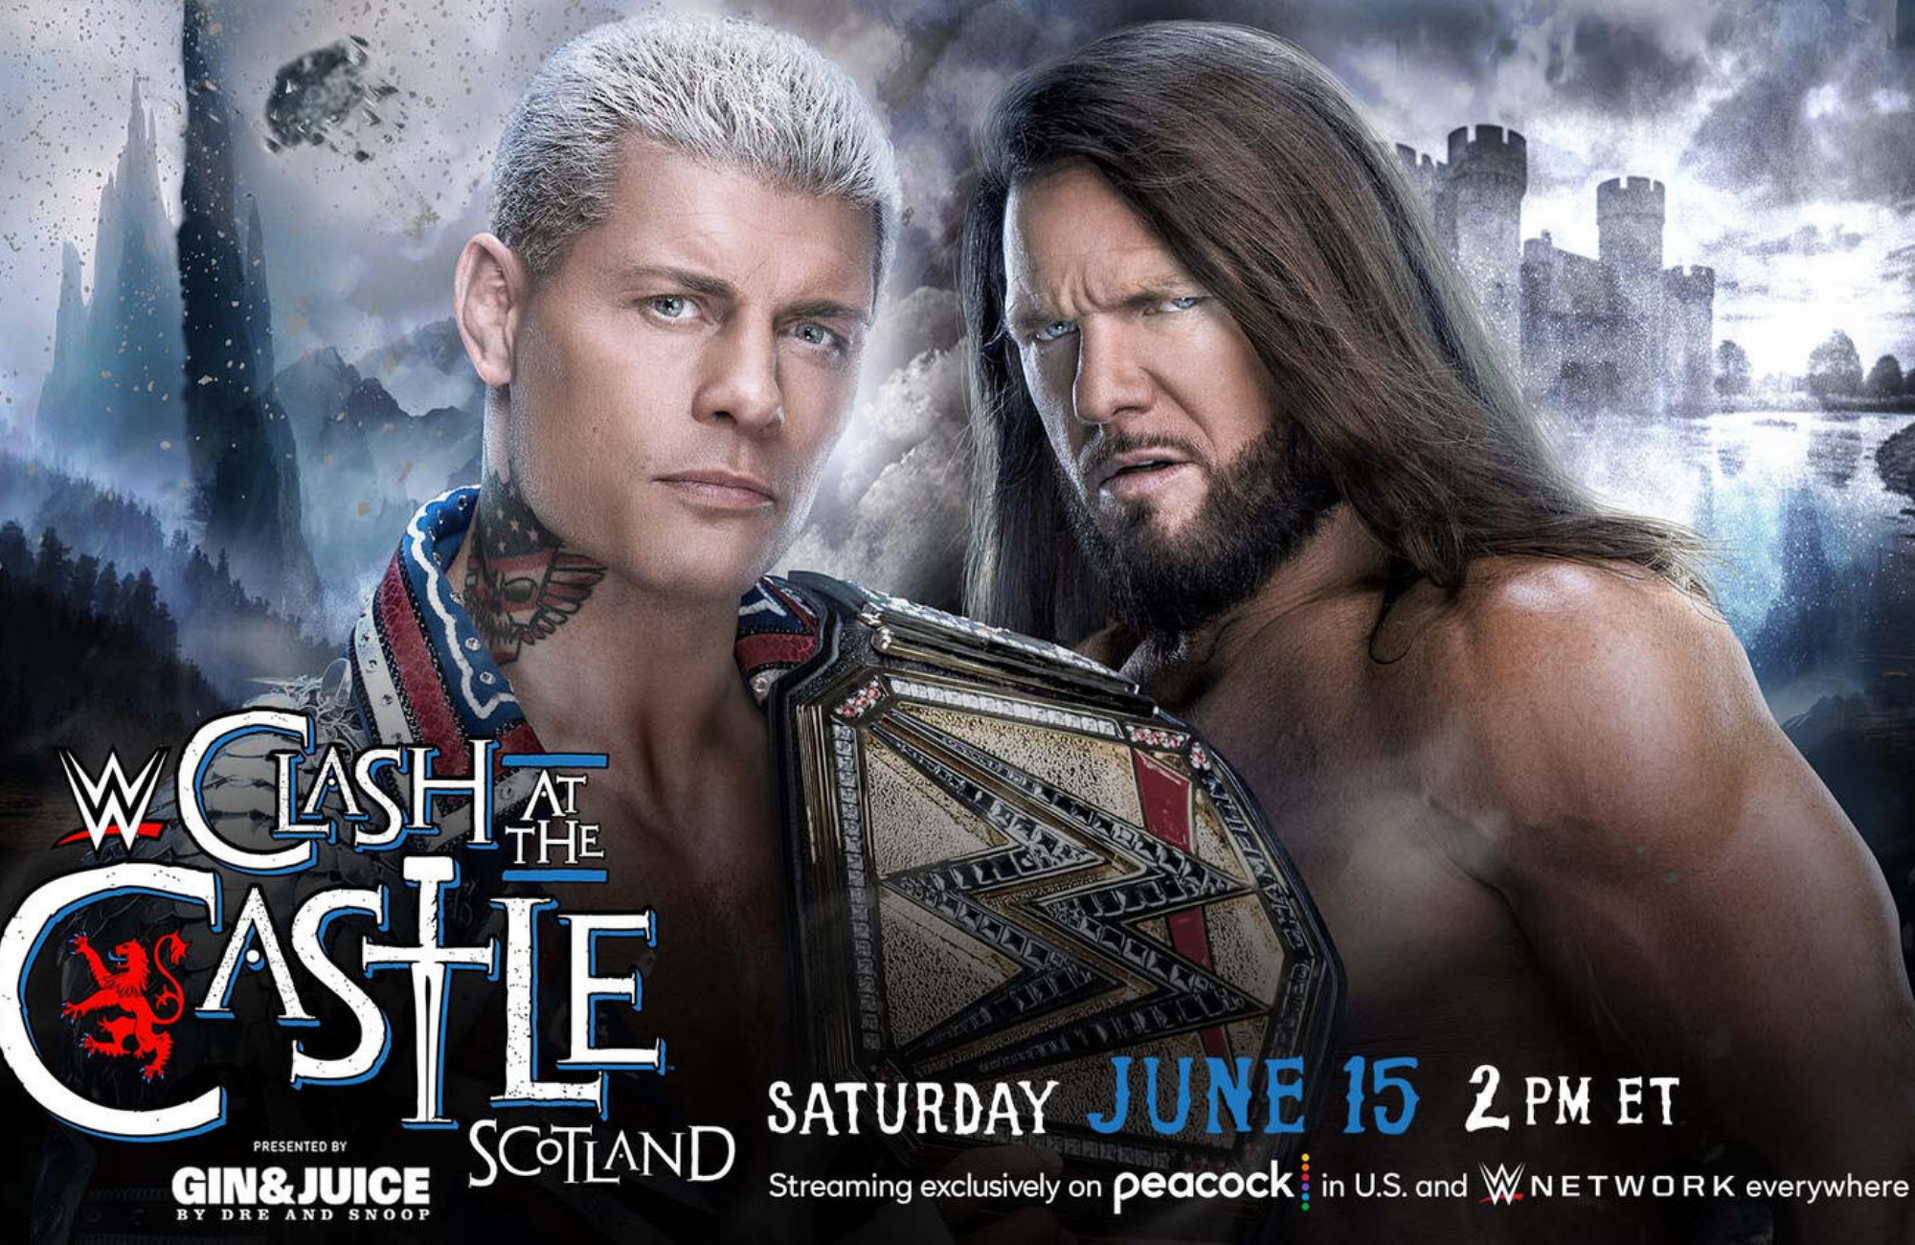 WWE Clash At The Castle Scotland Watch Live Sports Stream for Free